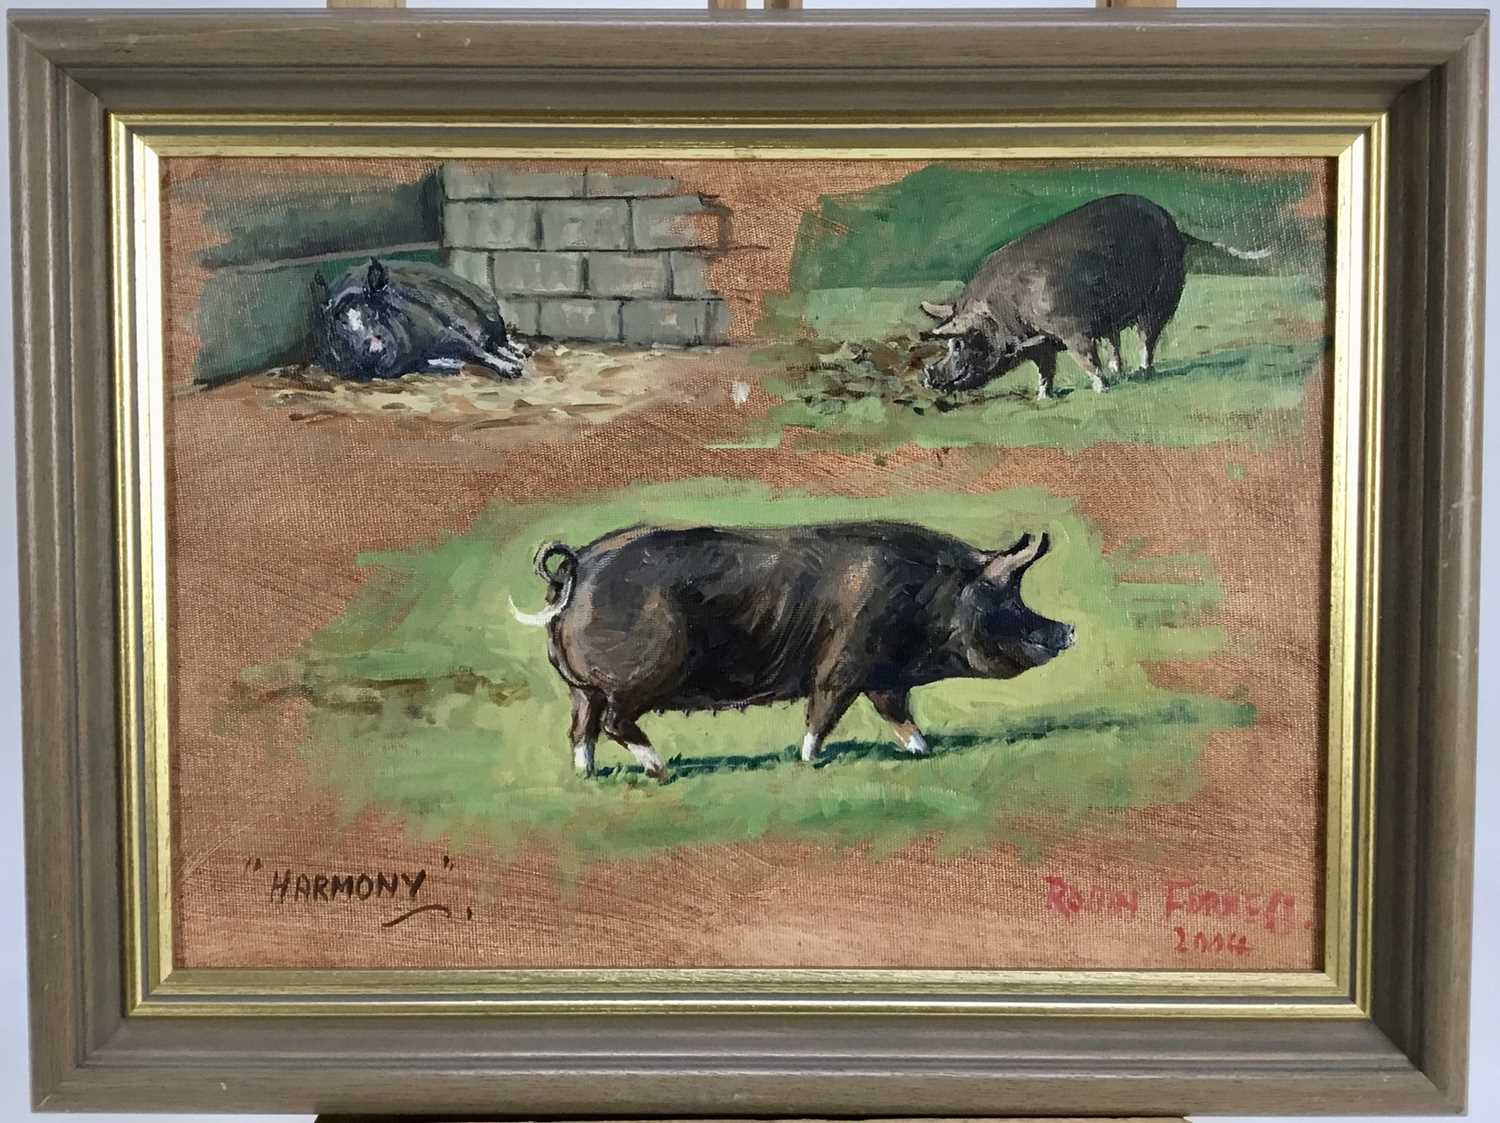 Lot 114 - Robin Furness, oil on board, "Harmony" a sow, signed, inscribed and dated 2004, in painted frame. 24 x 35cm.